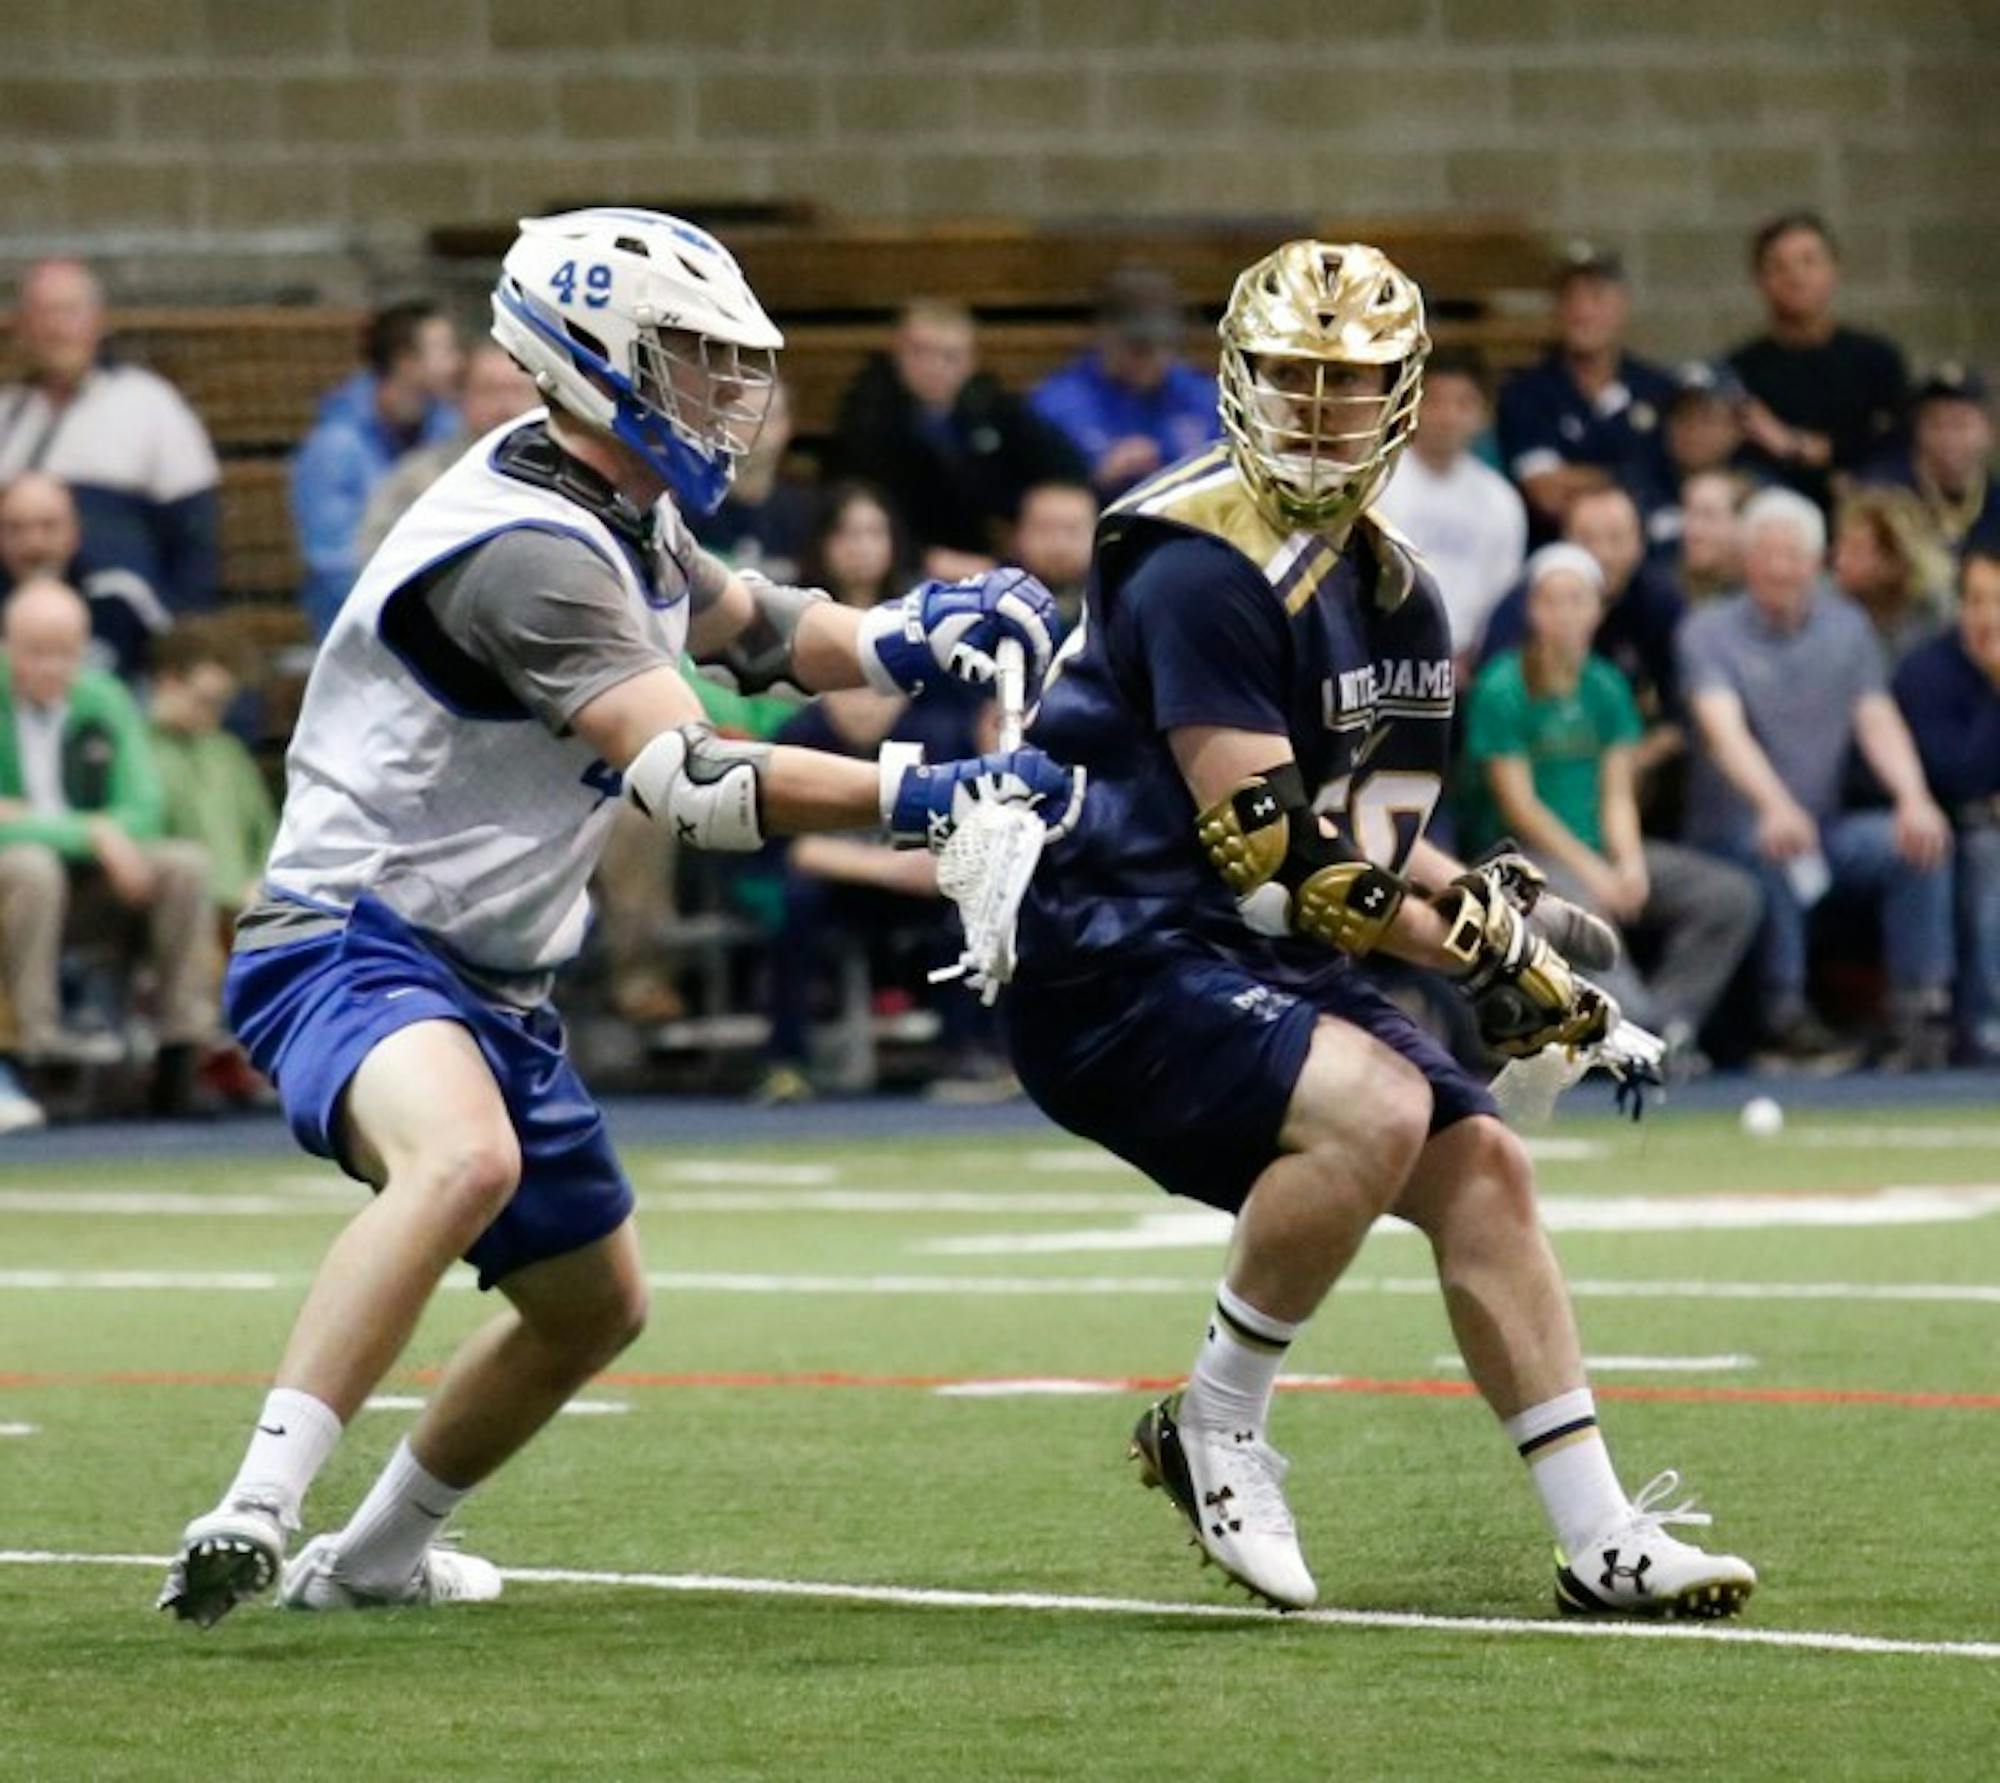 Irish senior attack Matt Kavanagh surveys his options during Notre Dame’s scrimmage against Air Force on Jan. 30 at Loftus Sports Center. Kavanagh led the Irish with 52 points and scored 27 goals last season.